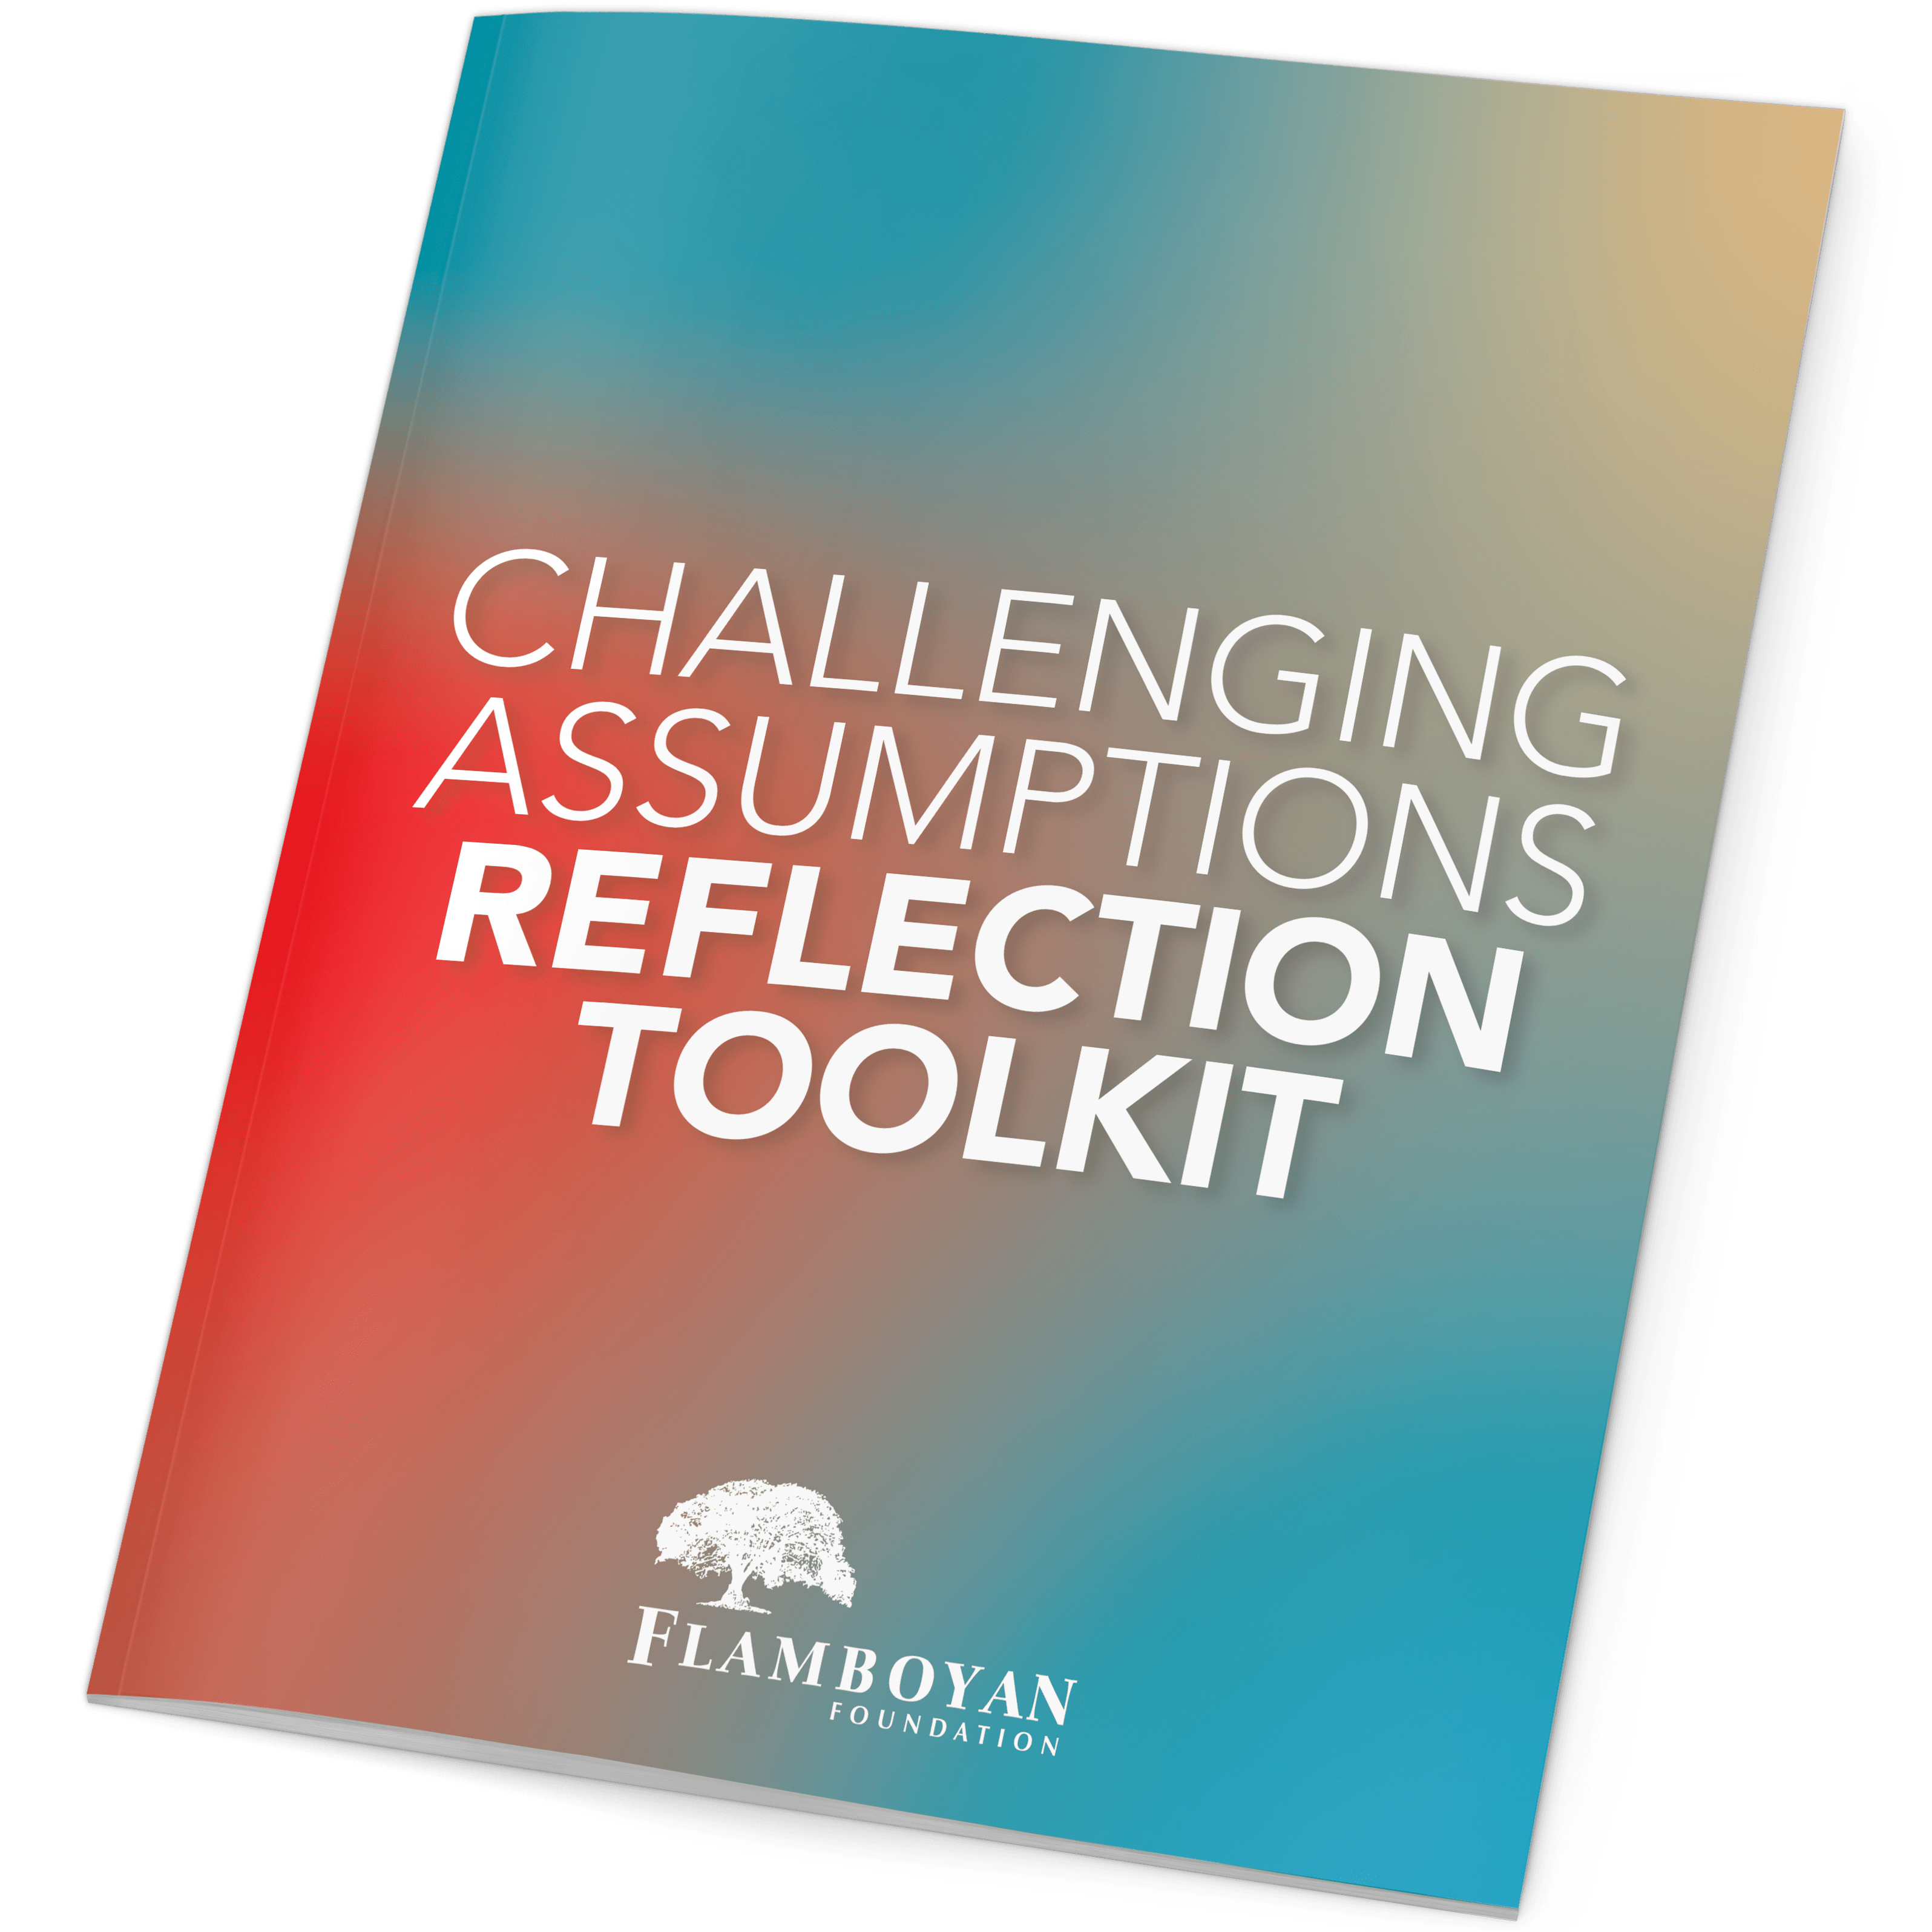 Challenging Assumptions Reflection Toolkit by Flamboyan Foundation